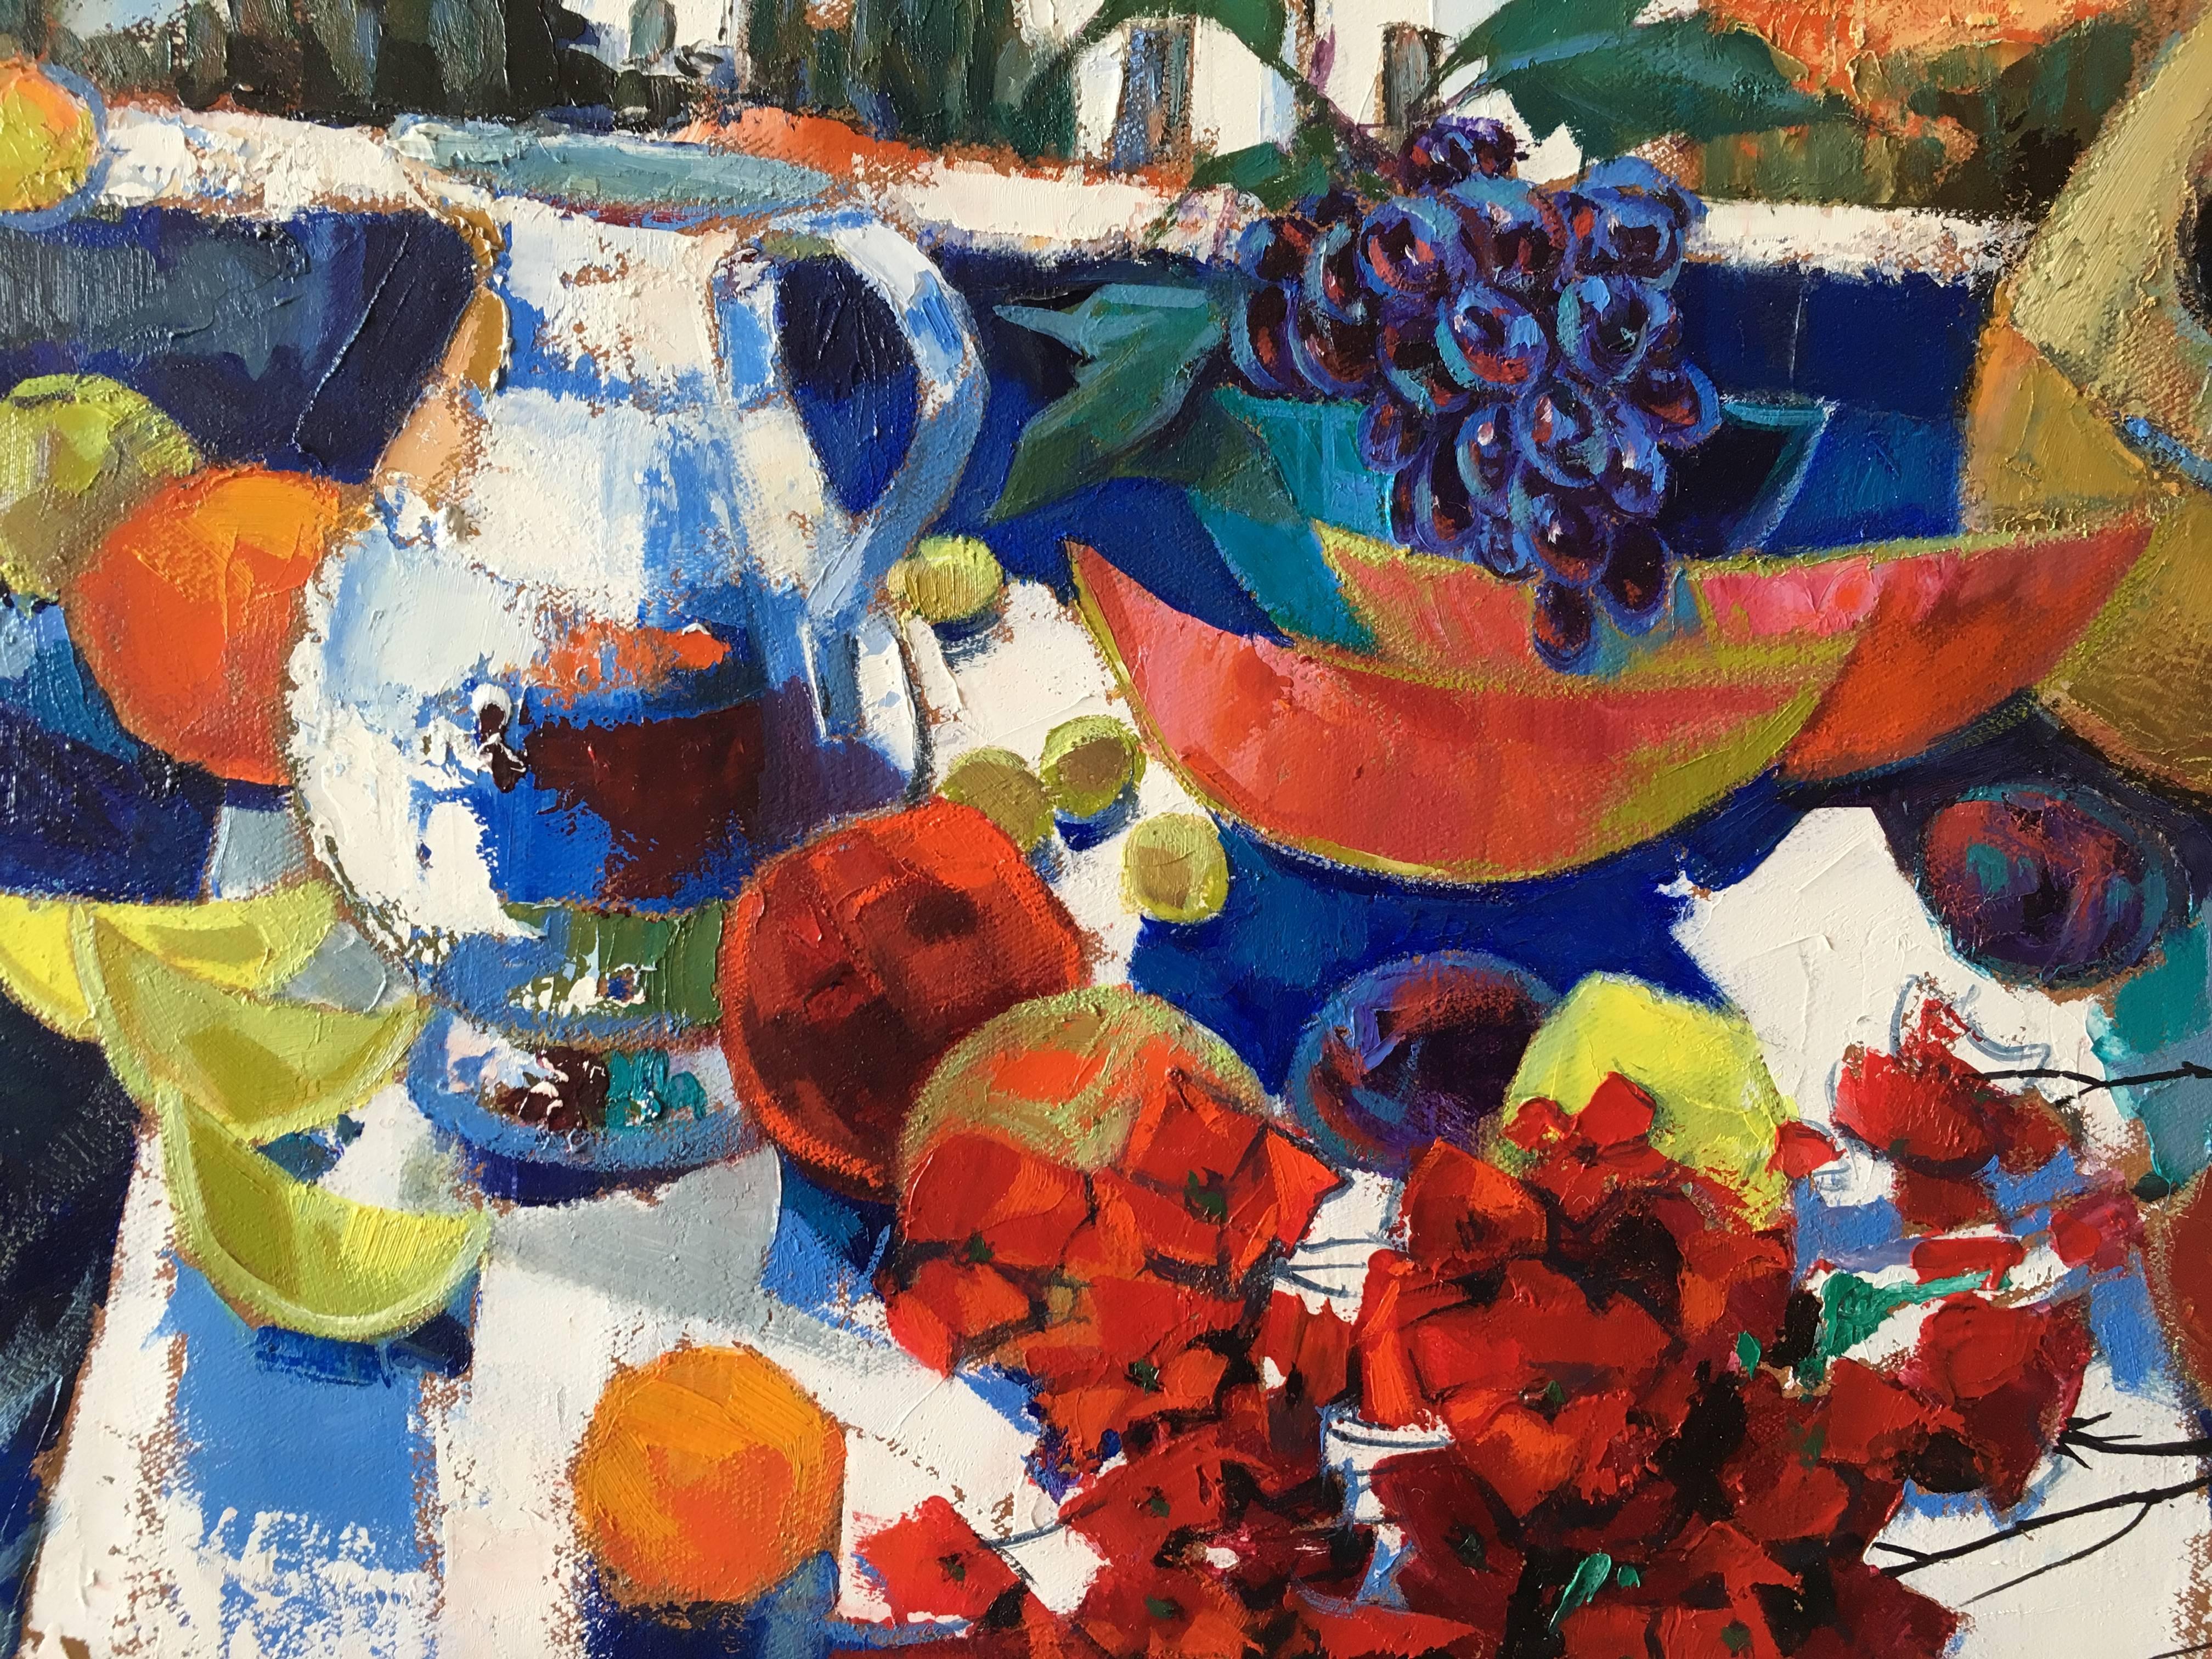 Afternoon snack on the terrace, still life with Spanish landscaape. - Contemporary Painting by Jori Duran